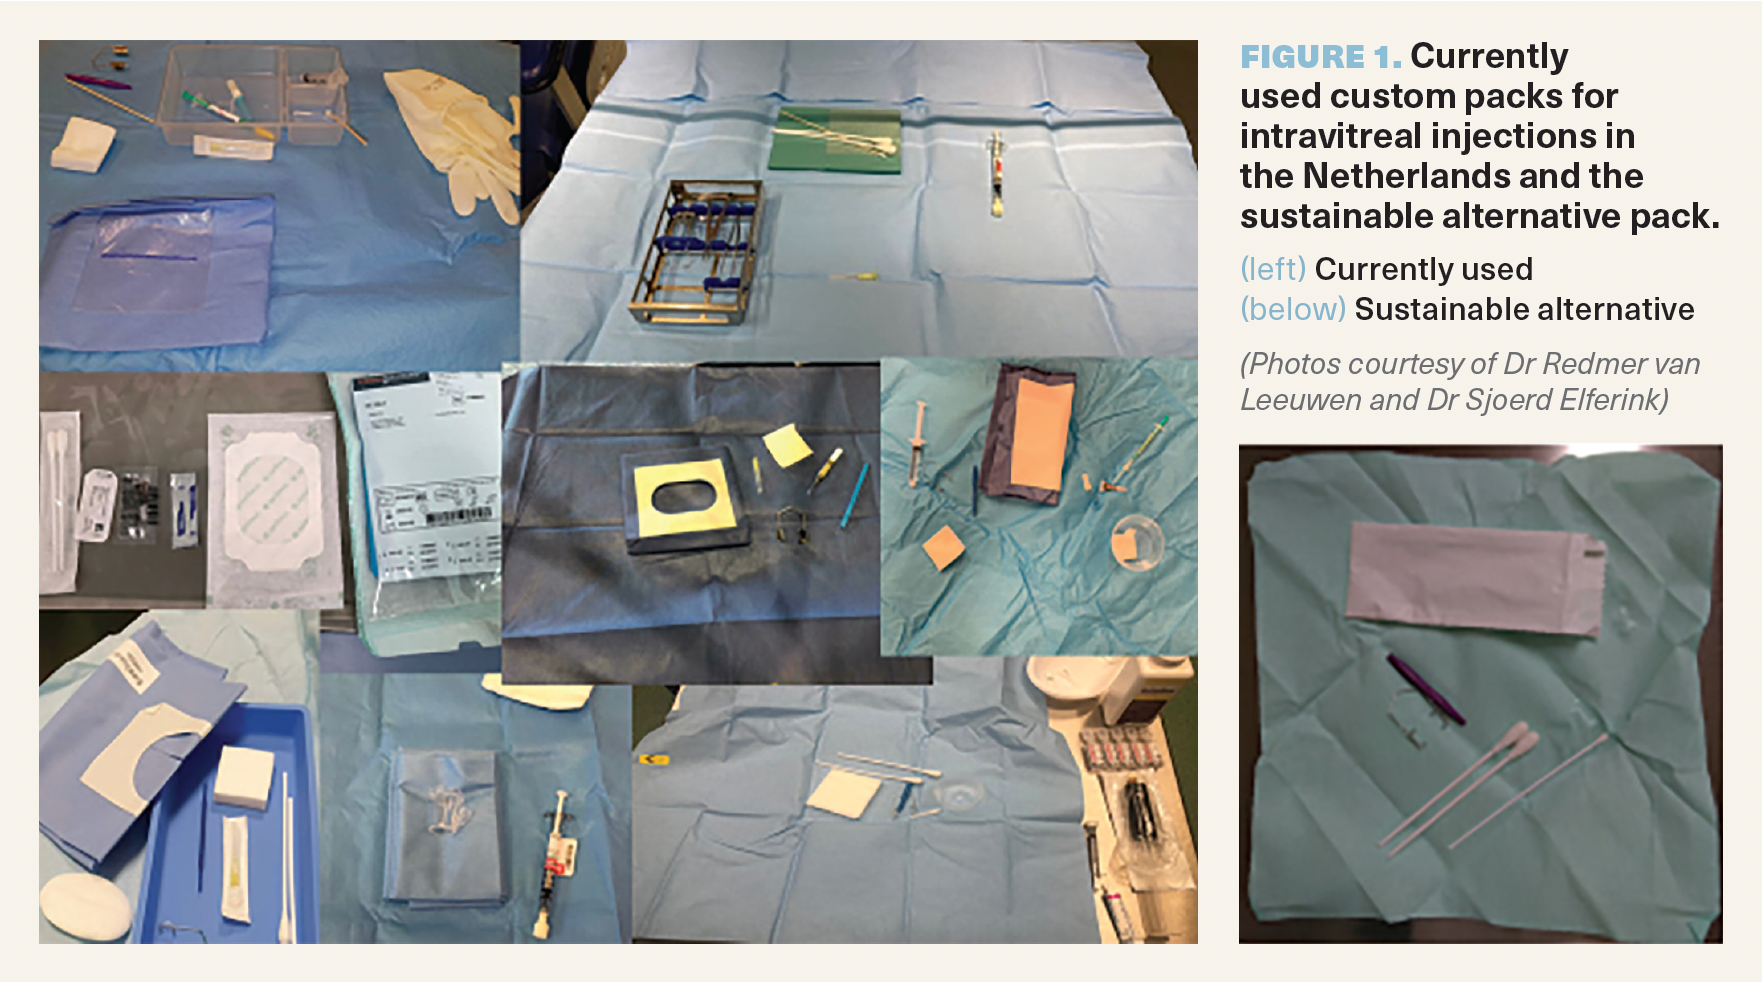 Figure 1. Currently used custom packs for intravitreal injections in the Netherlands and the sustainable alternative pack. (Photos courtesy of Dr Redmer van Leeuwen and Dr Sjoerd Elferink)